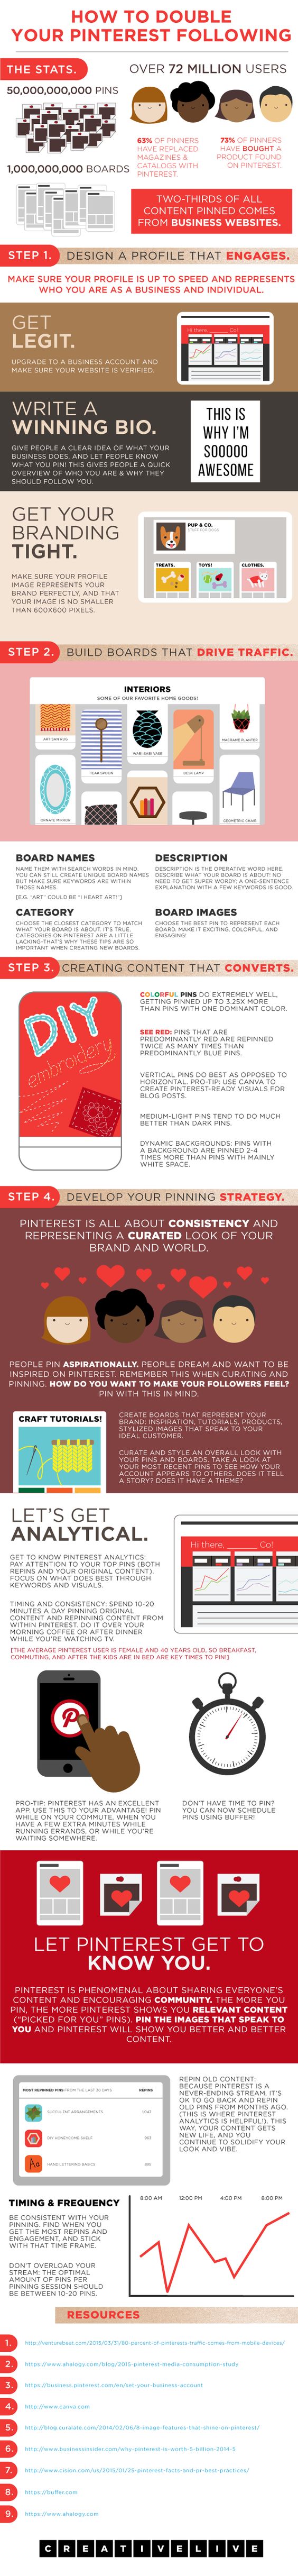 How to Get More Followers on Pinterest Infographic on CreativeLive